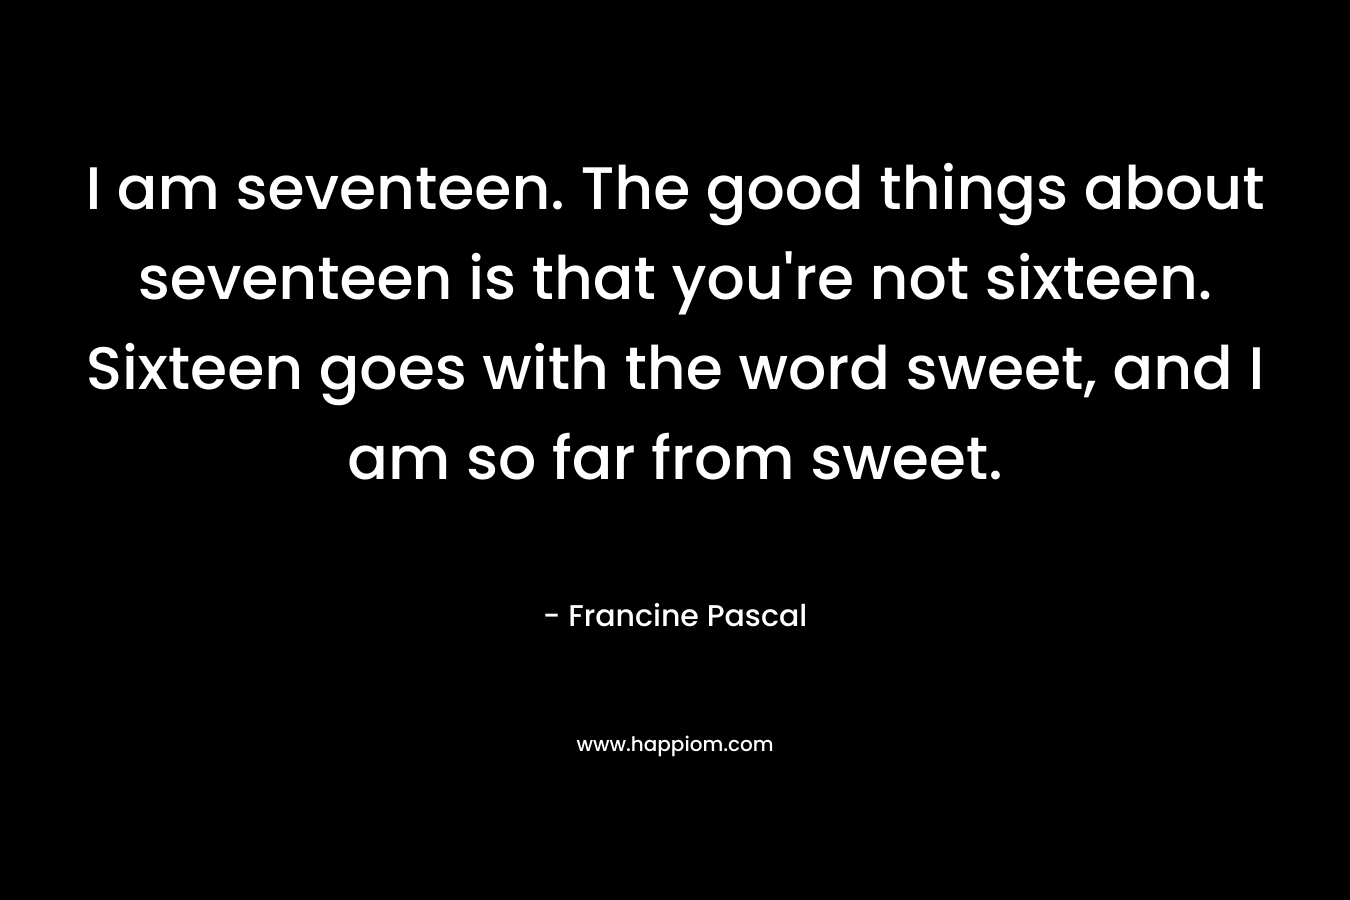 I am seventeen. The good things about seventeen is that you’re not sixteen. Sixteen goes with the word sweet, and I am so far from sweet. – Francine Pascal